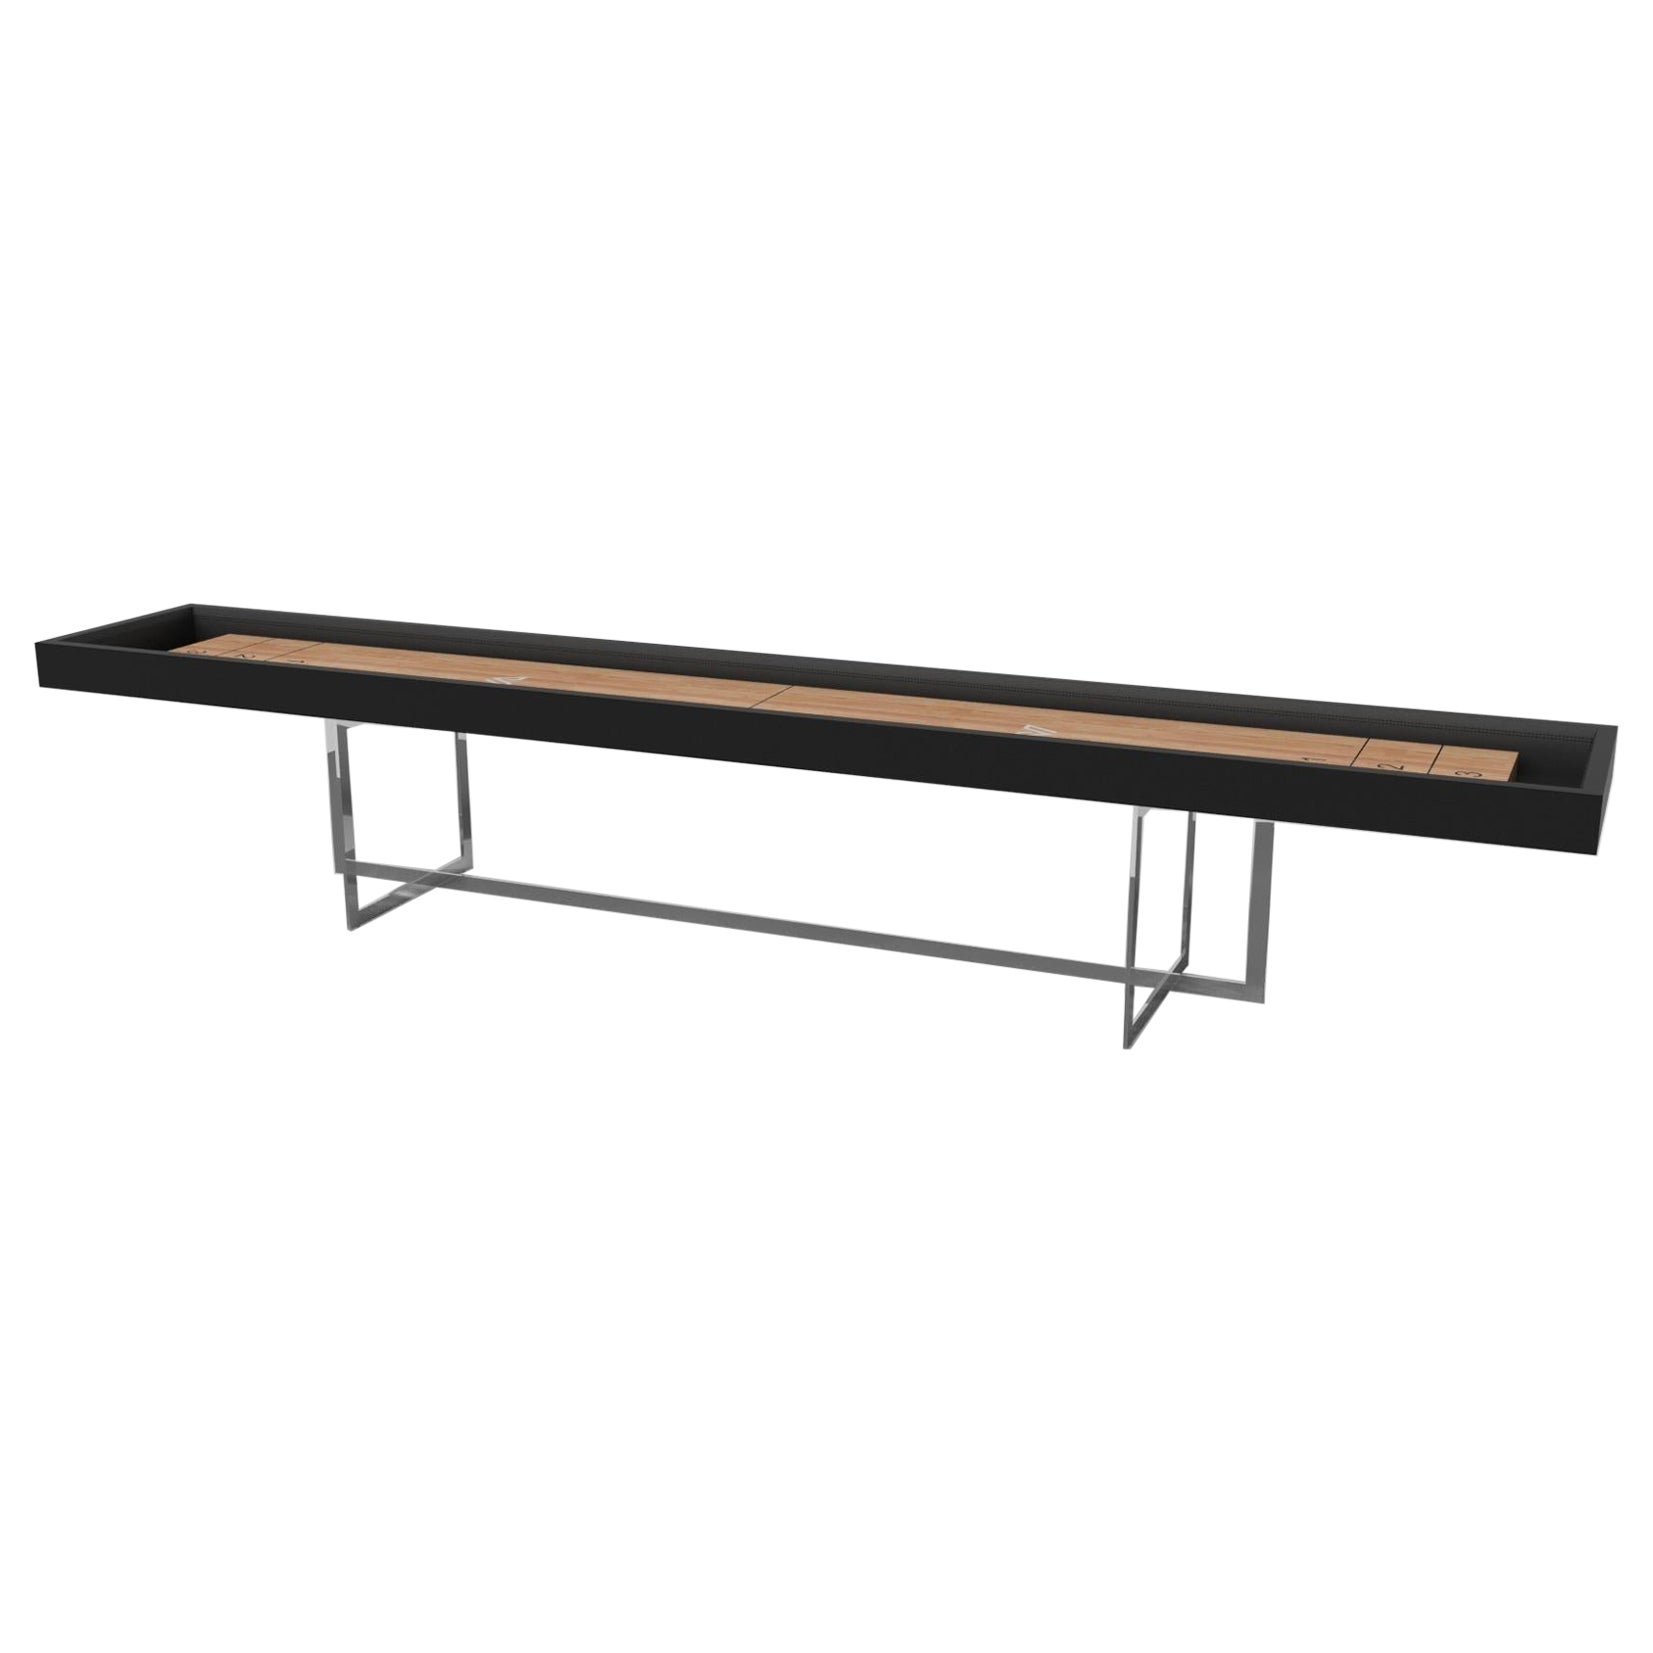 Elevate Customs Beso Shuffleboard Tables / Solid Pantone Black Color in 14' -USA